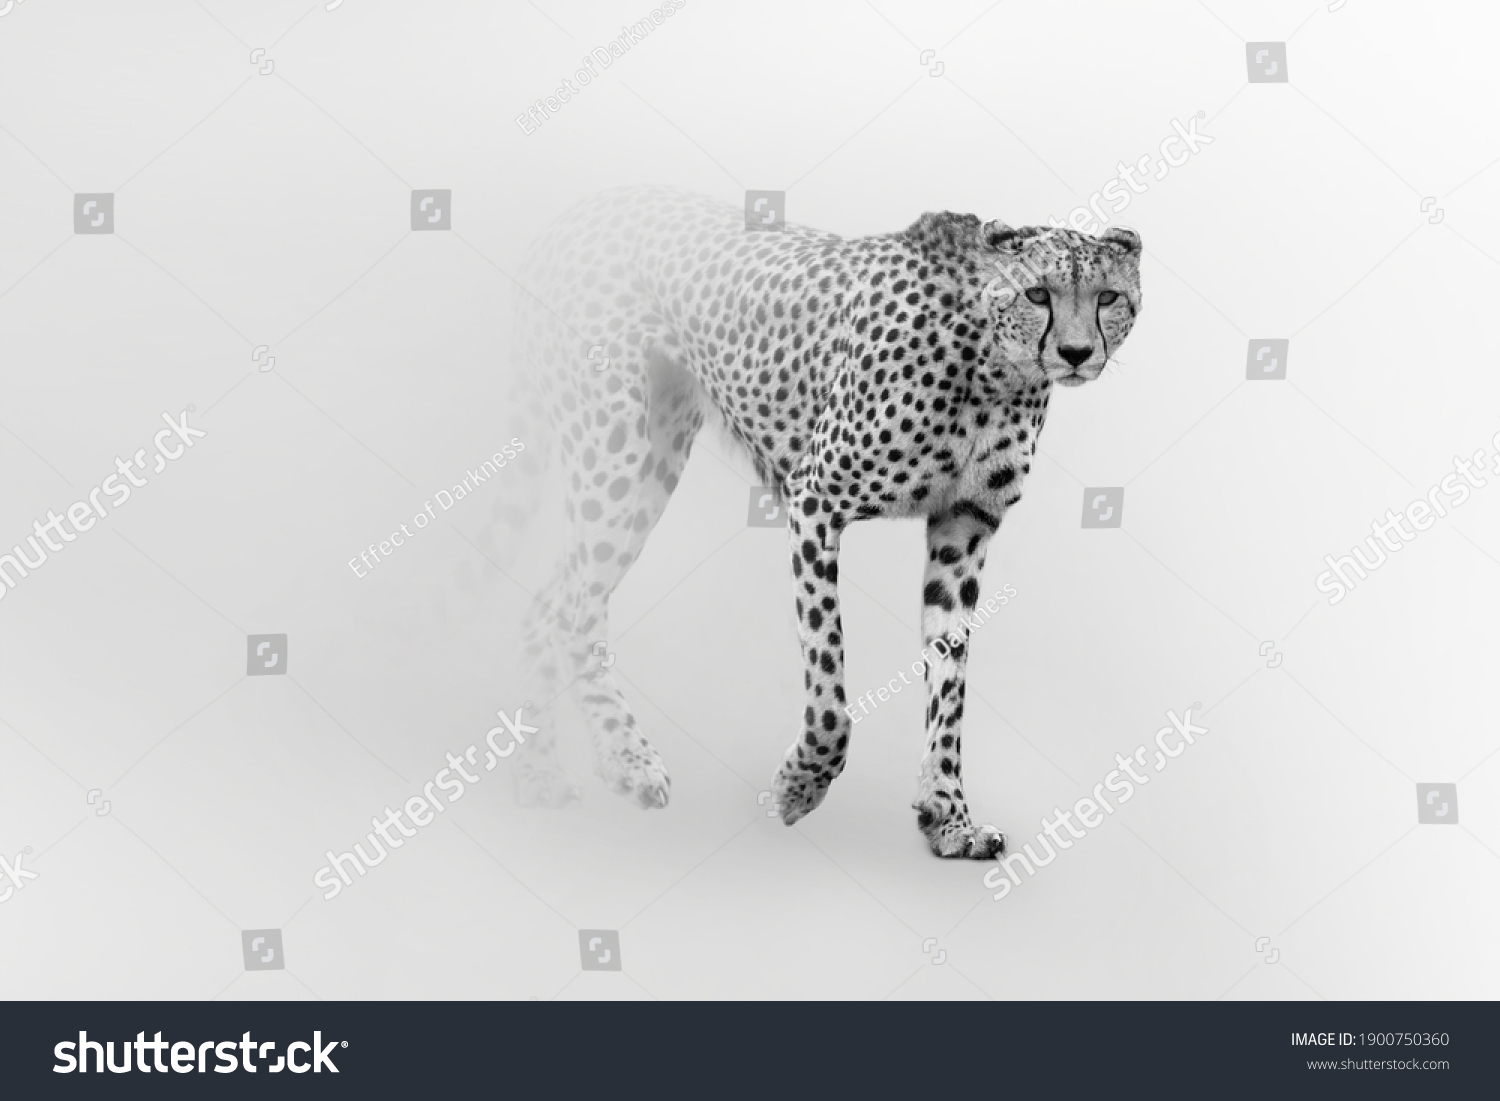 Cheetah is the worlds fastest land animal #1900750360